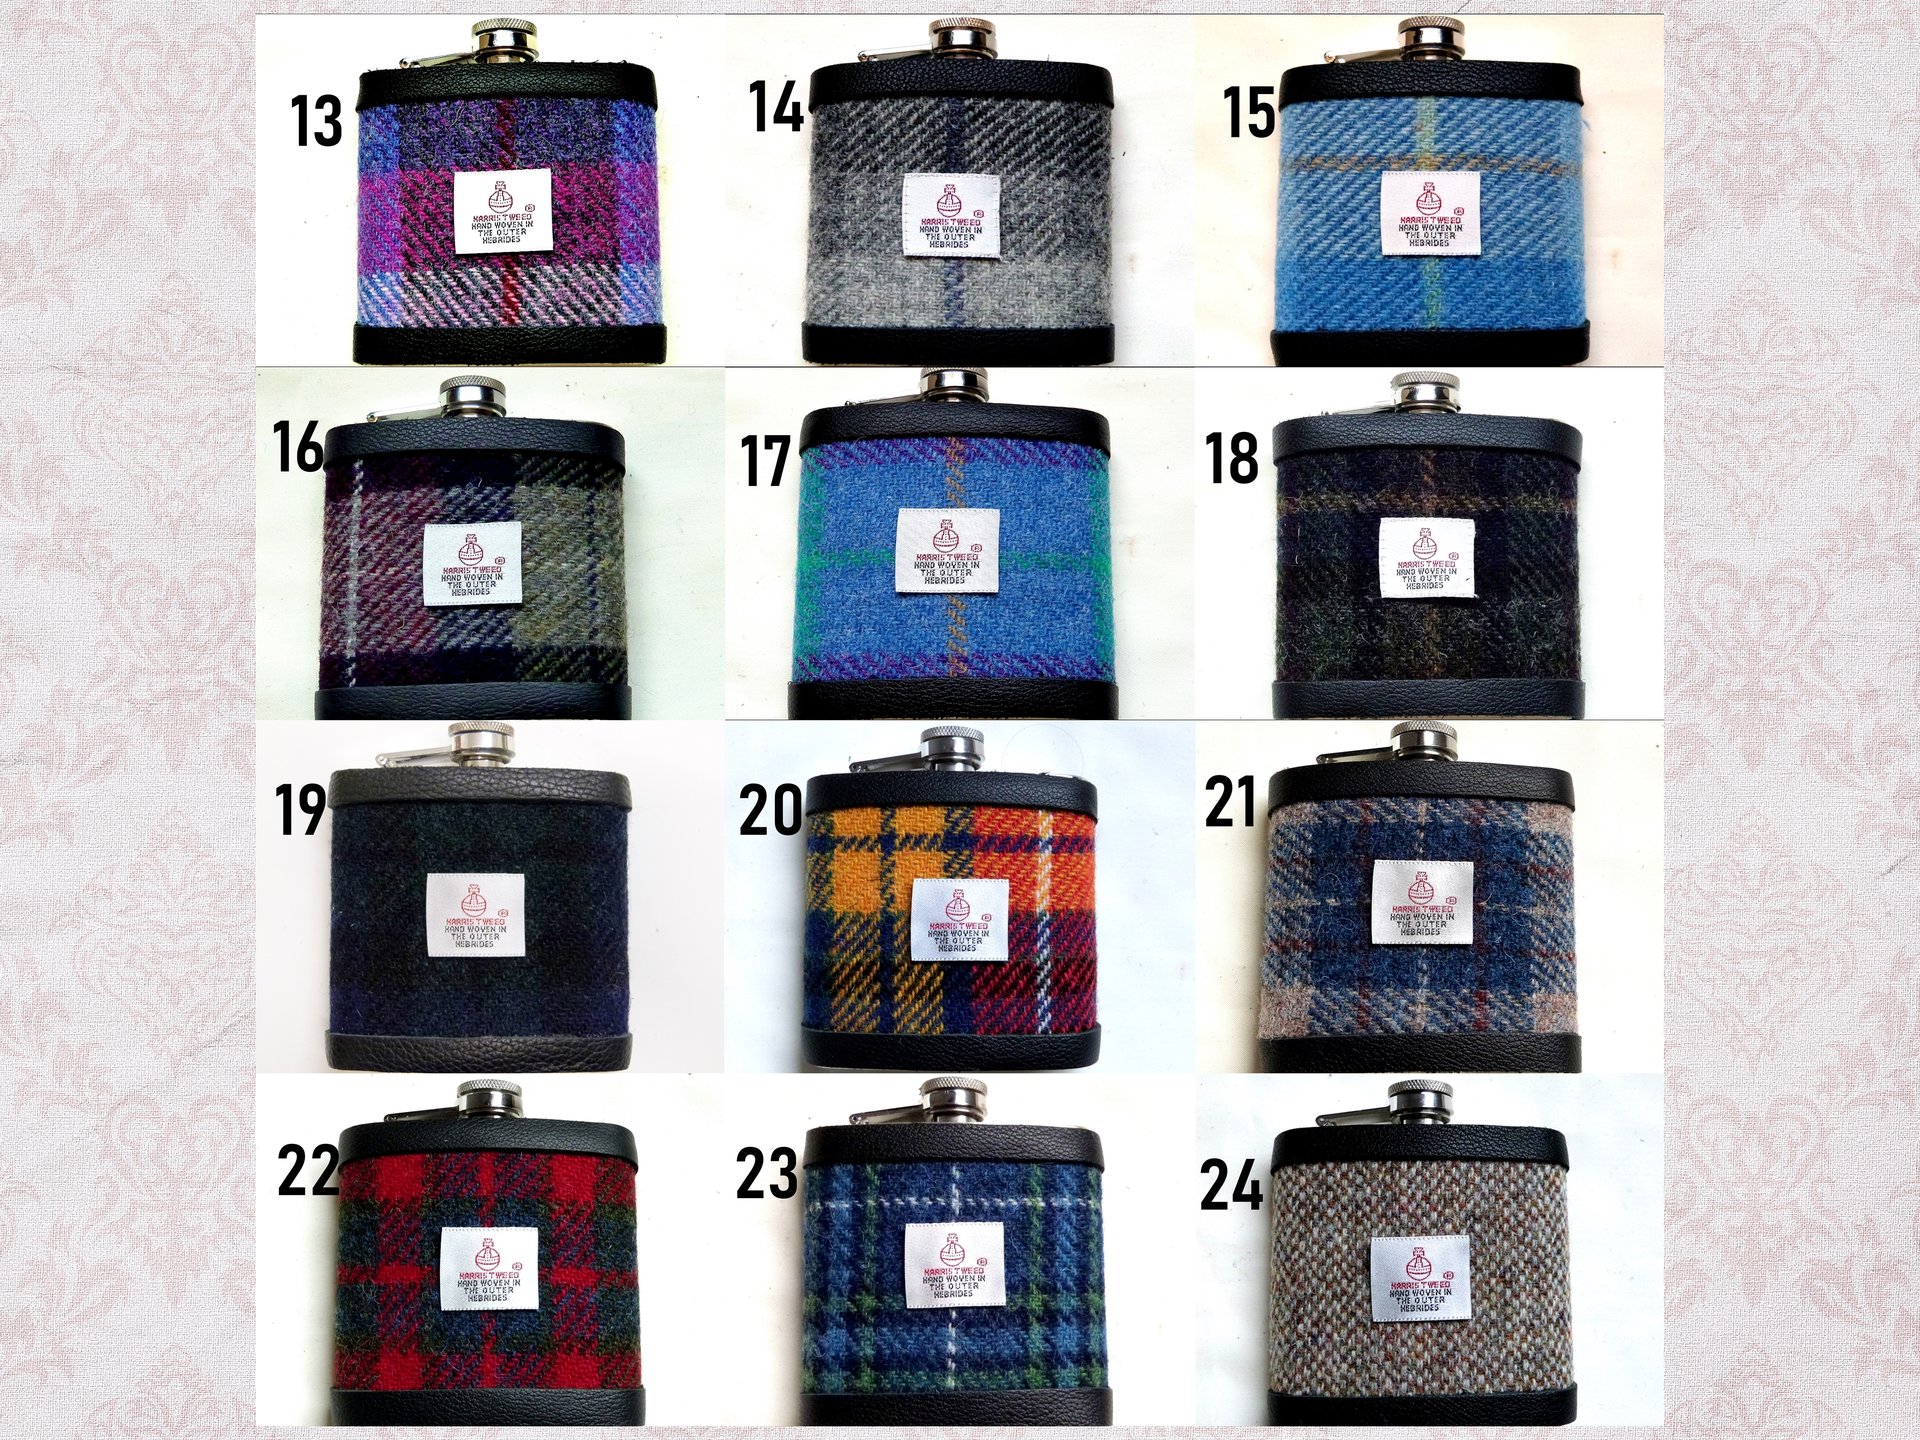 Harris Tweed hip flask in choice of  30 patterns and colours with Orb label handmade in Scotland using handwoven tweed and real leather trim